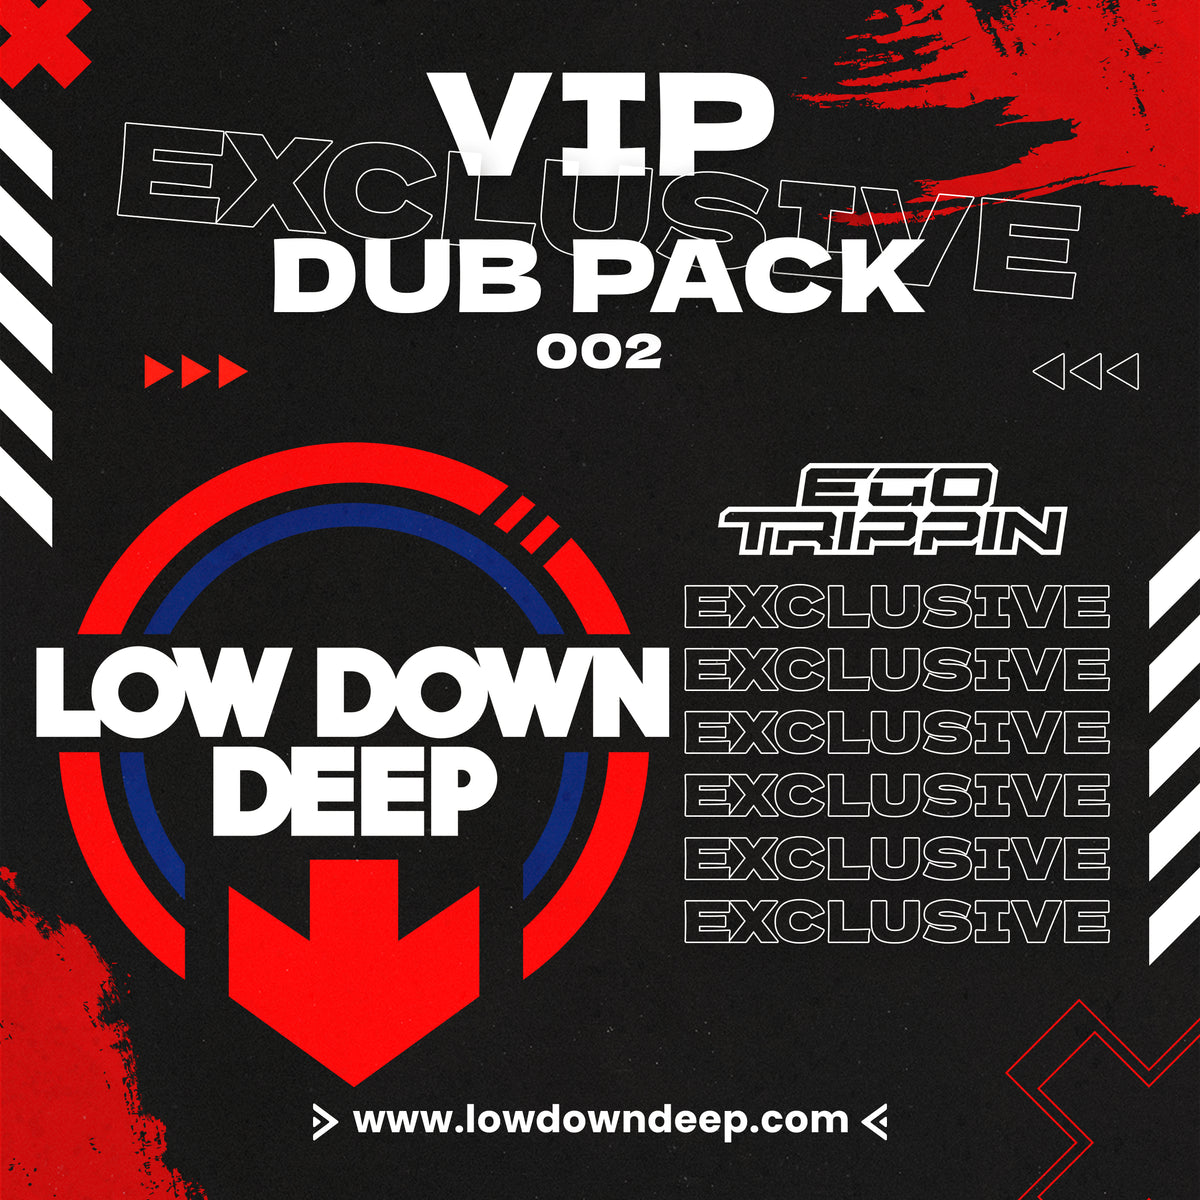 EXCLUSIVE VIP DUB PACK 002 - EGO TRIPPIN